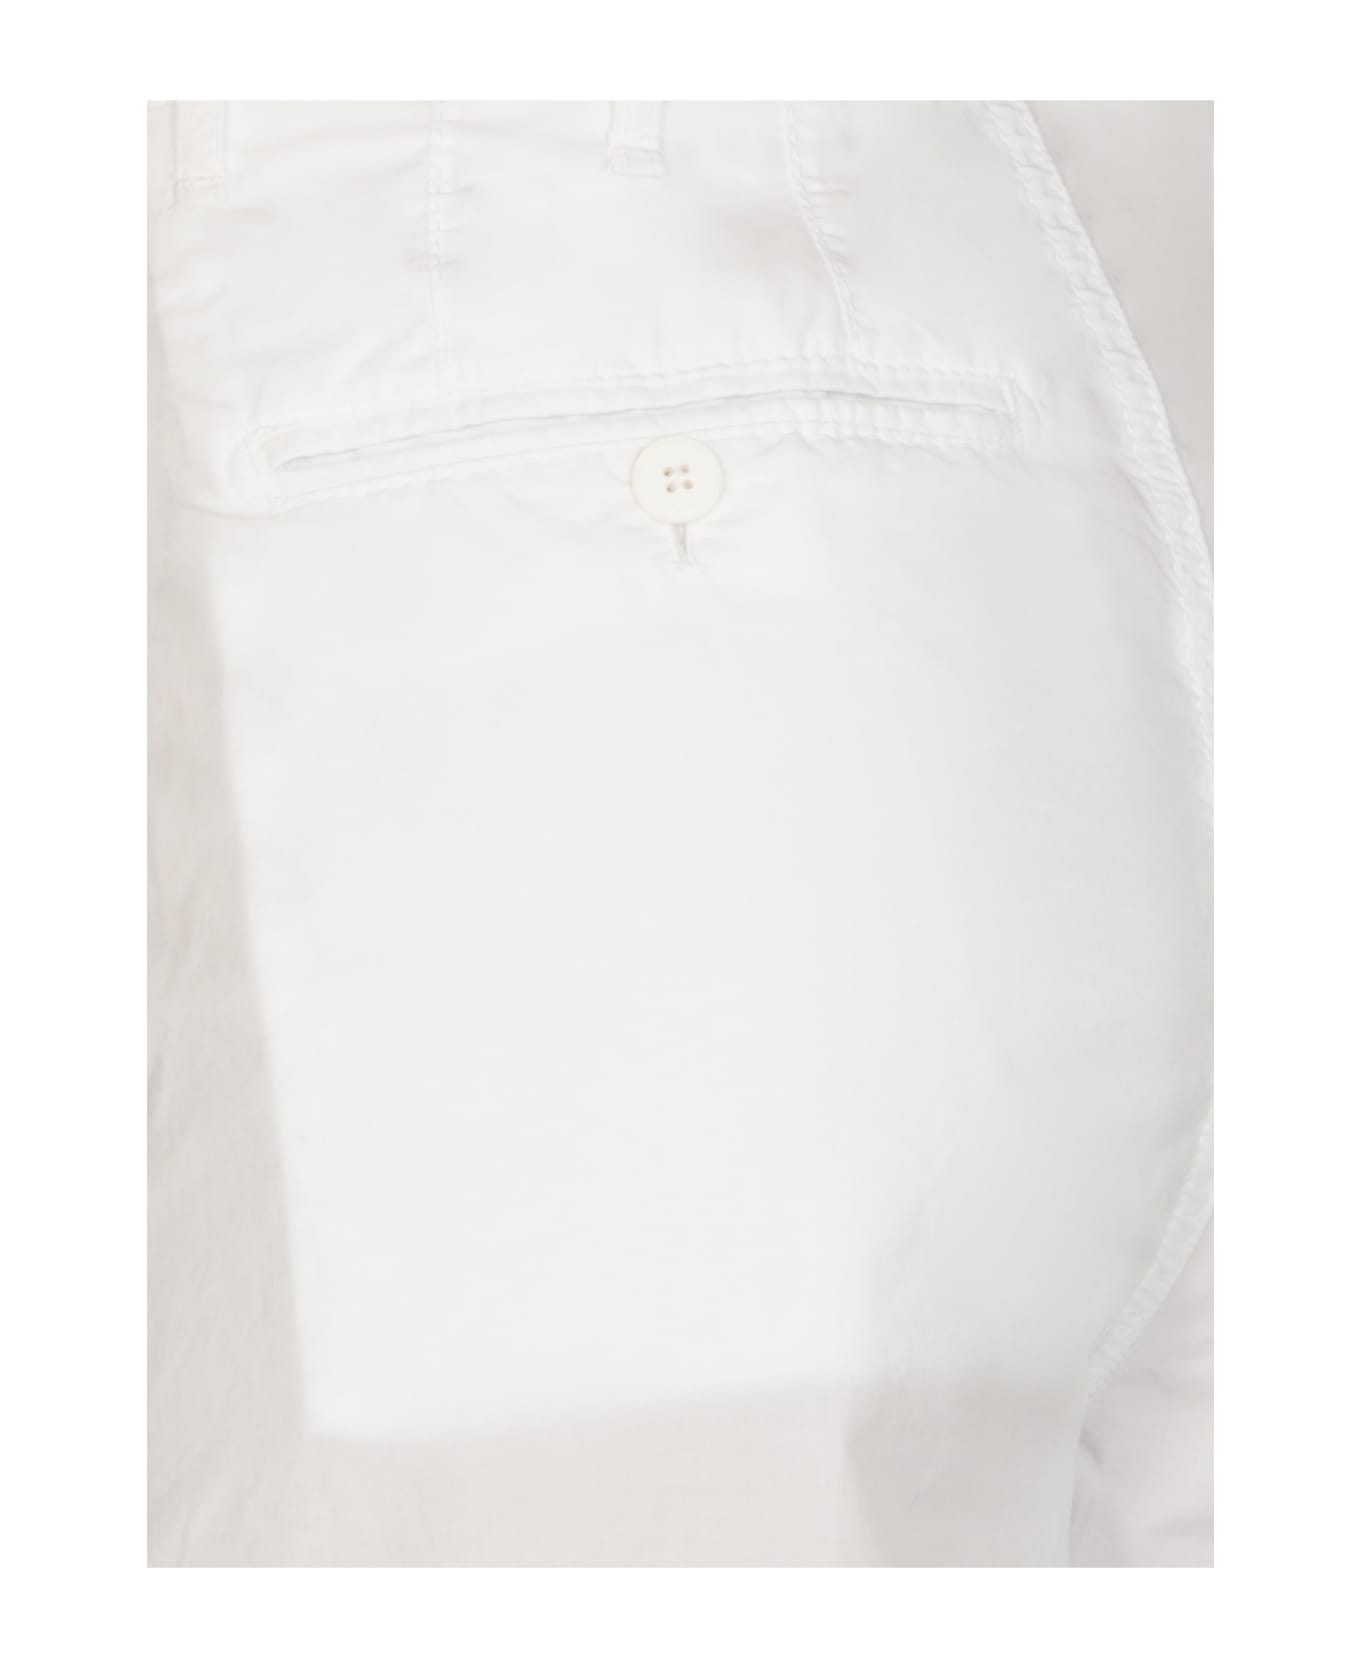 Dondup Janis Trousers - White ボトムス